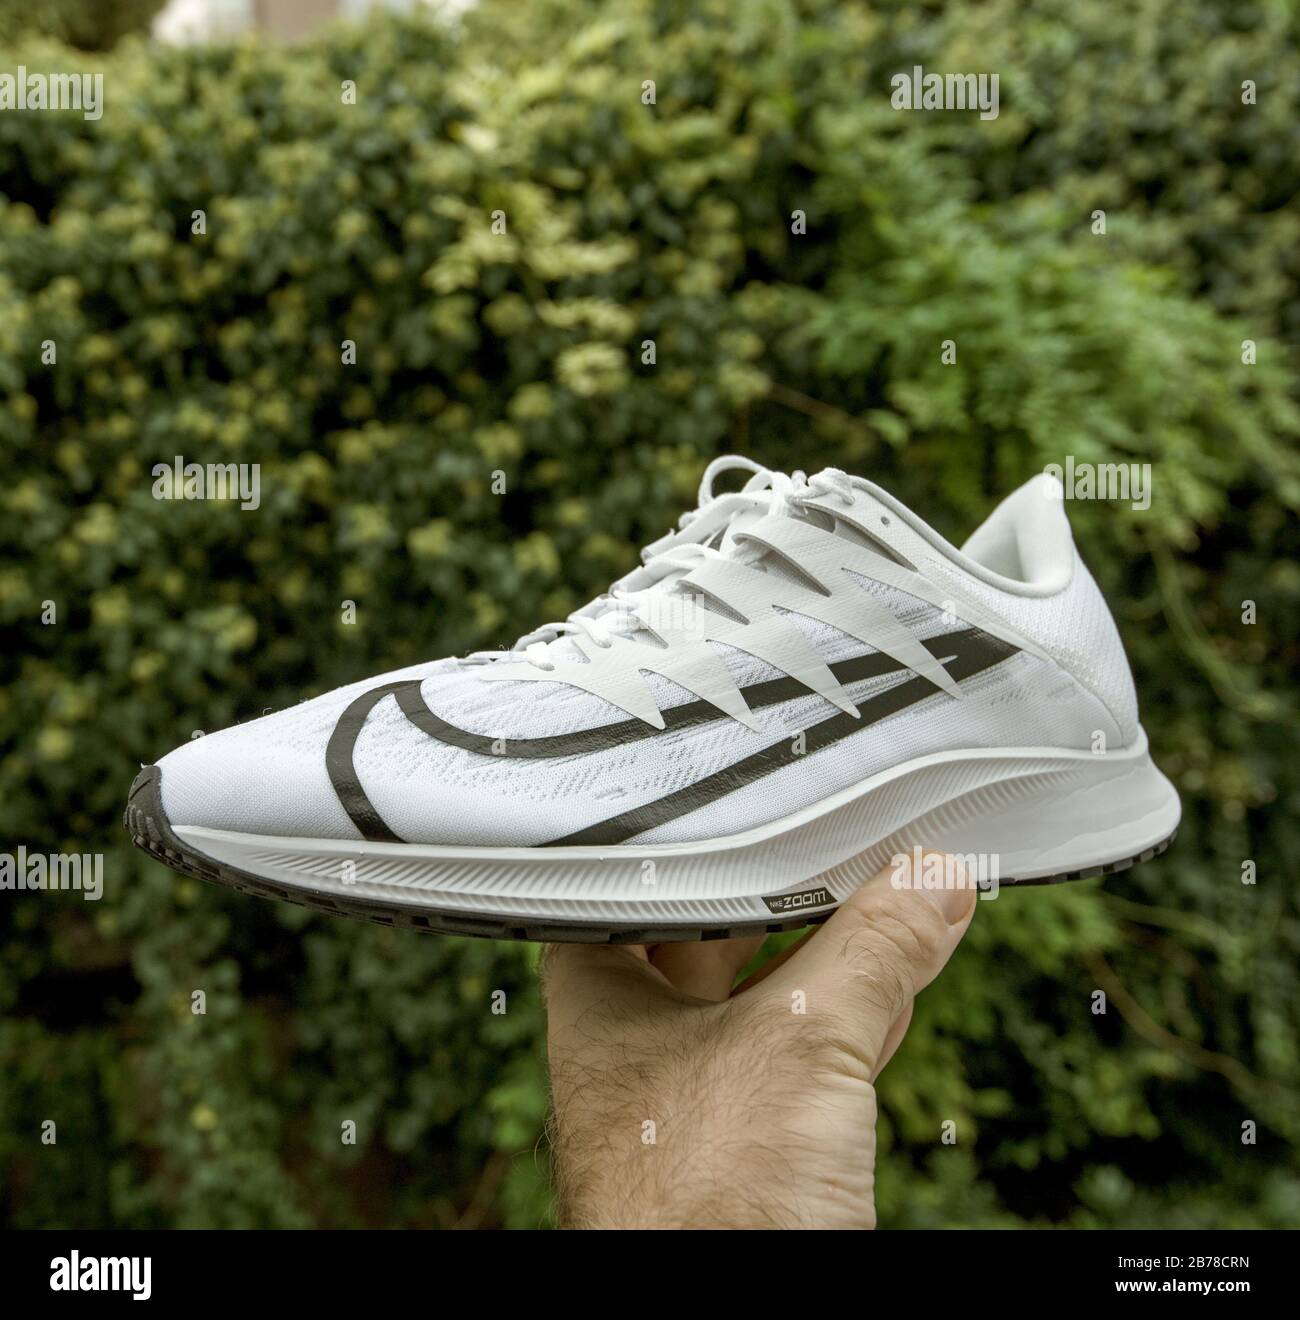 Paris, France - Sep 23, 2019: POV man hand demonstrating against green  background professional running shoe manufactured by Nike model Zoom Rival  Fly Stock Photo - Alamy